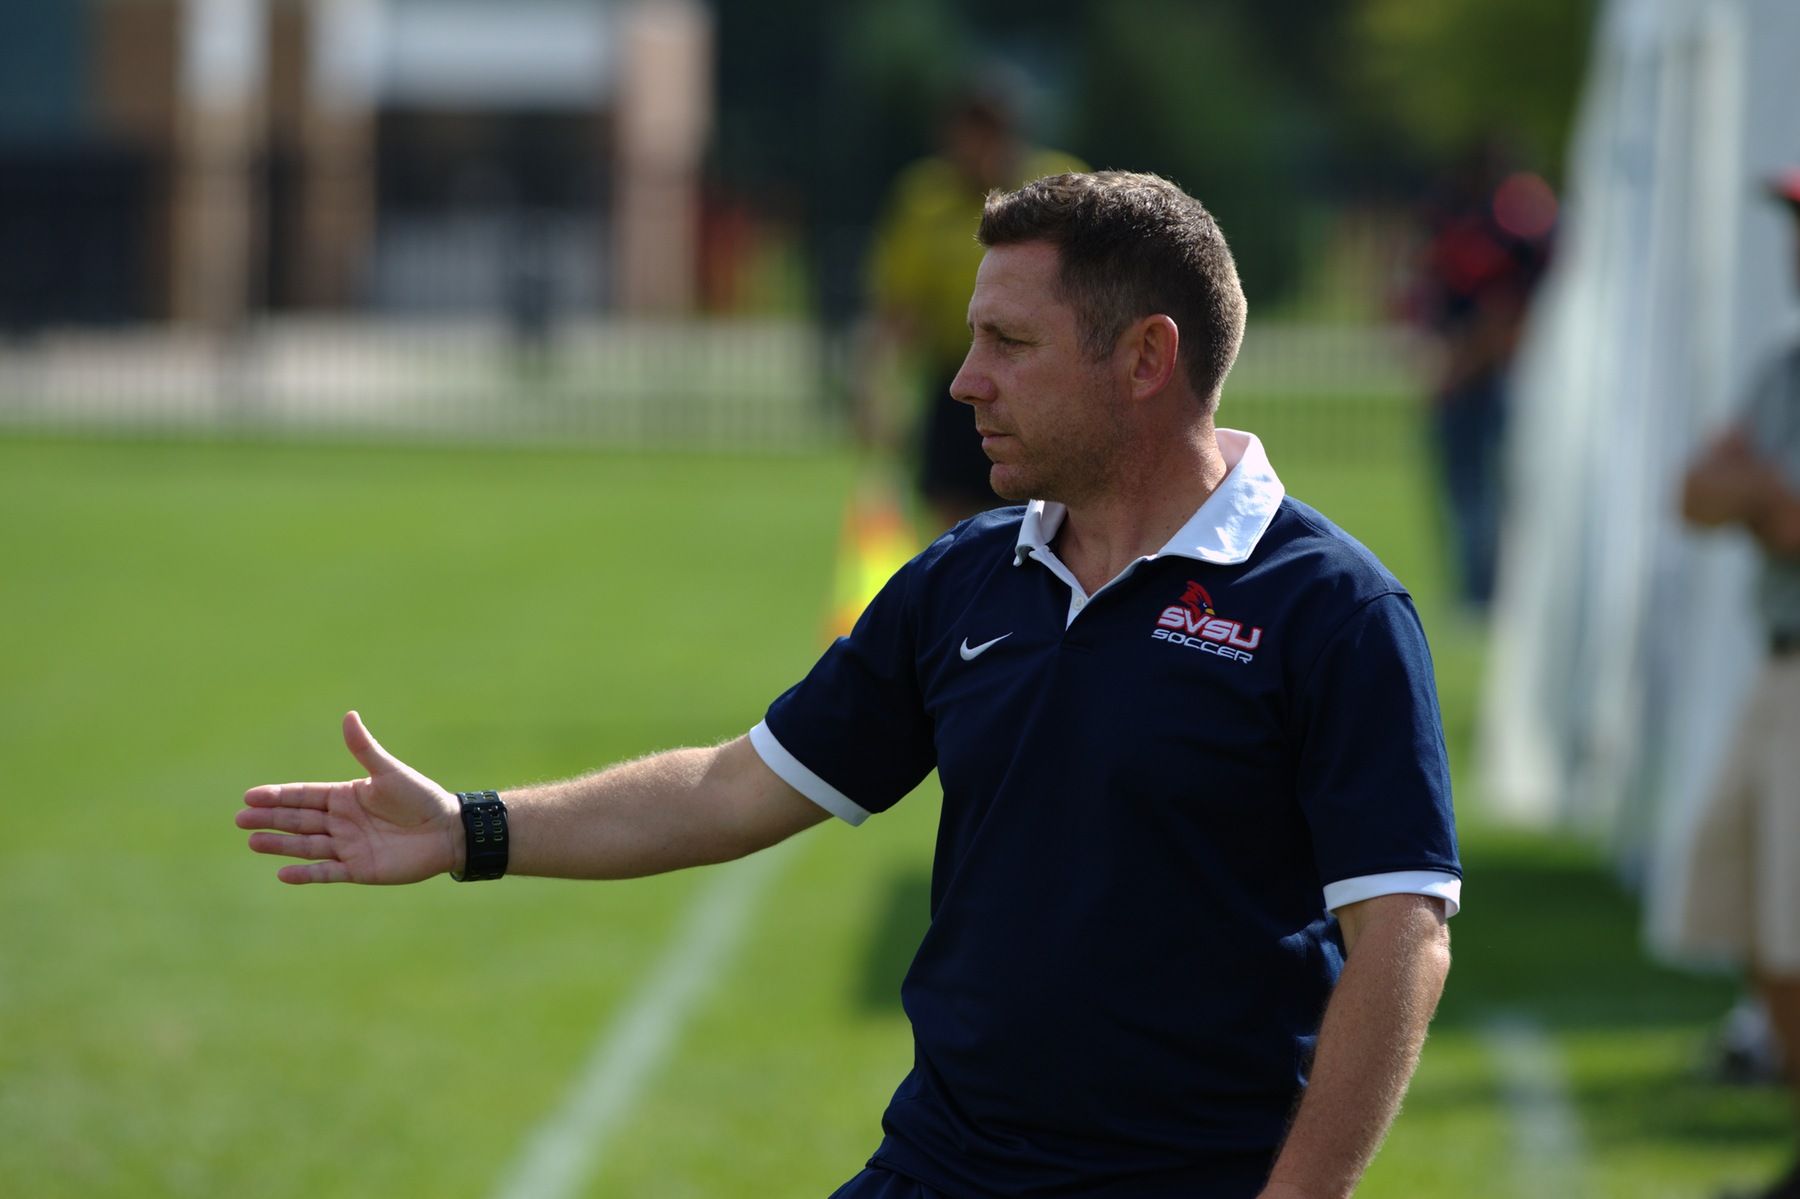 Men's Soccer head coach Andy Wagstaff stepping down from the program